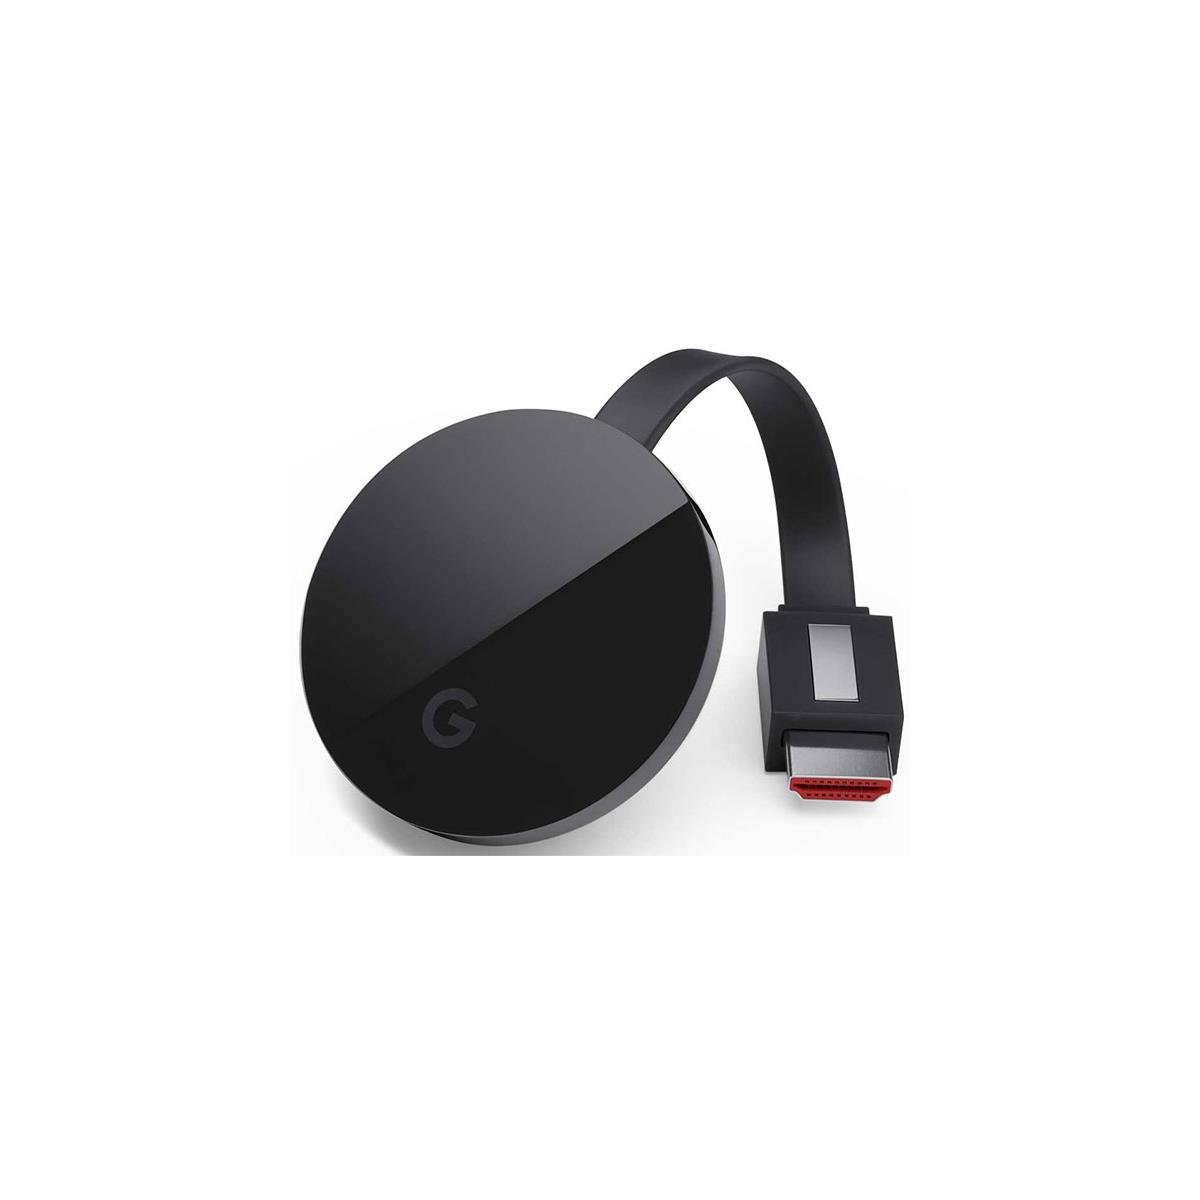 Powerful Puck, Google Ultra Streams 4K Video And HDR For $69 | HotHardware